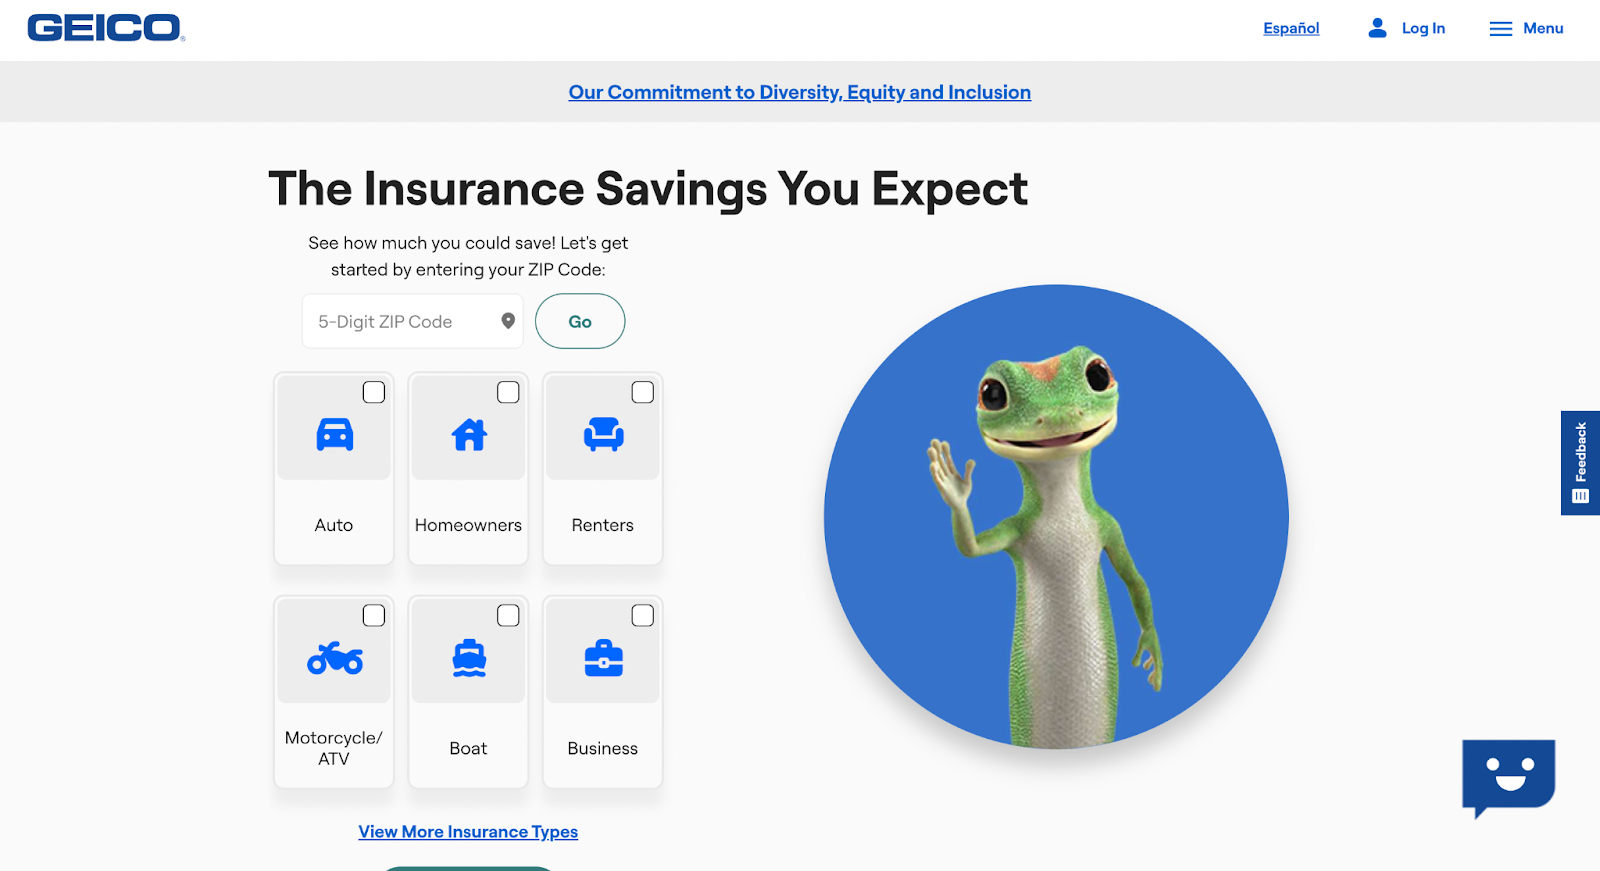 Insurance website design, example from Geico